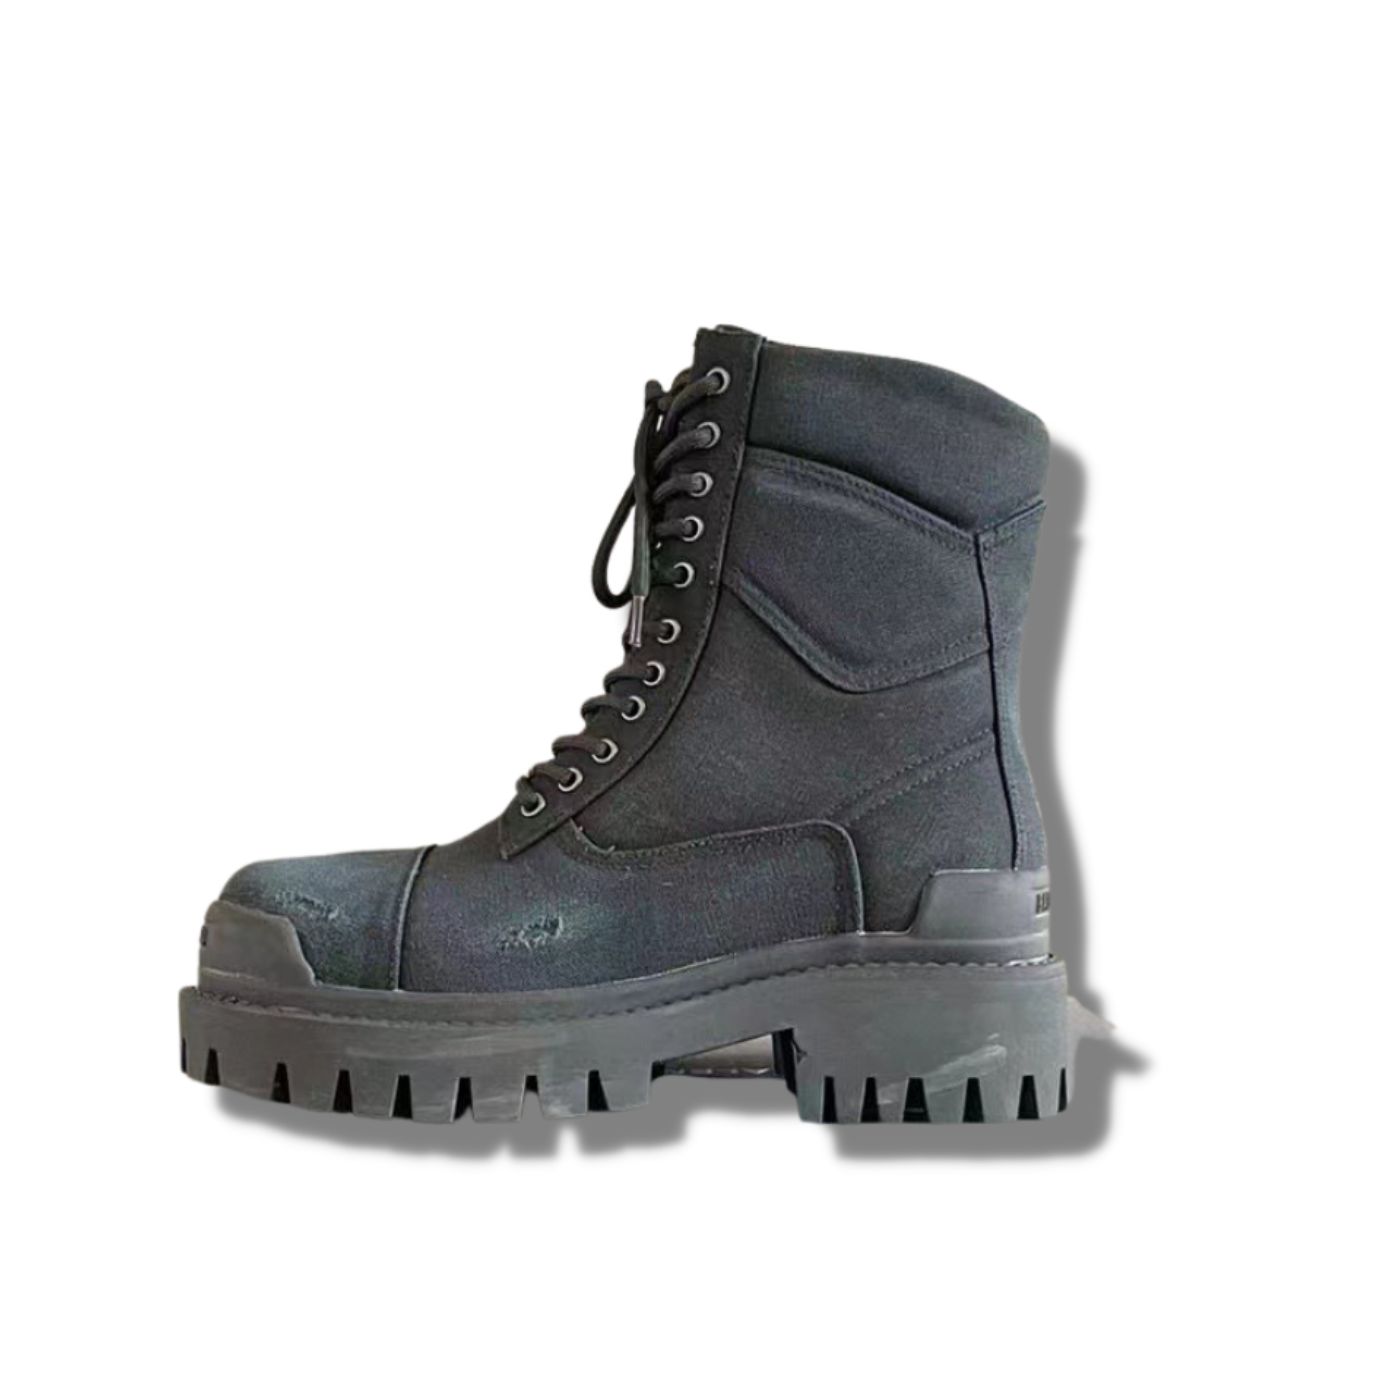 Combat Boots Grey For Women 694060 W2H11-3300